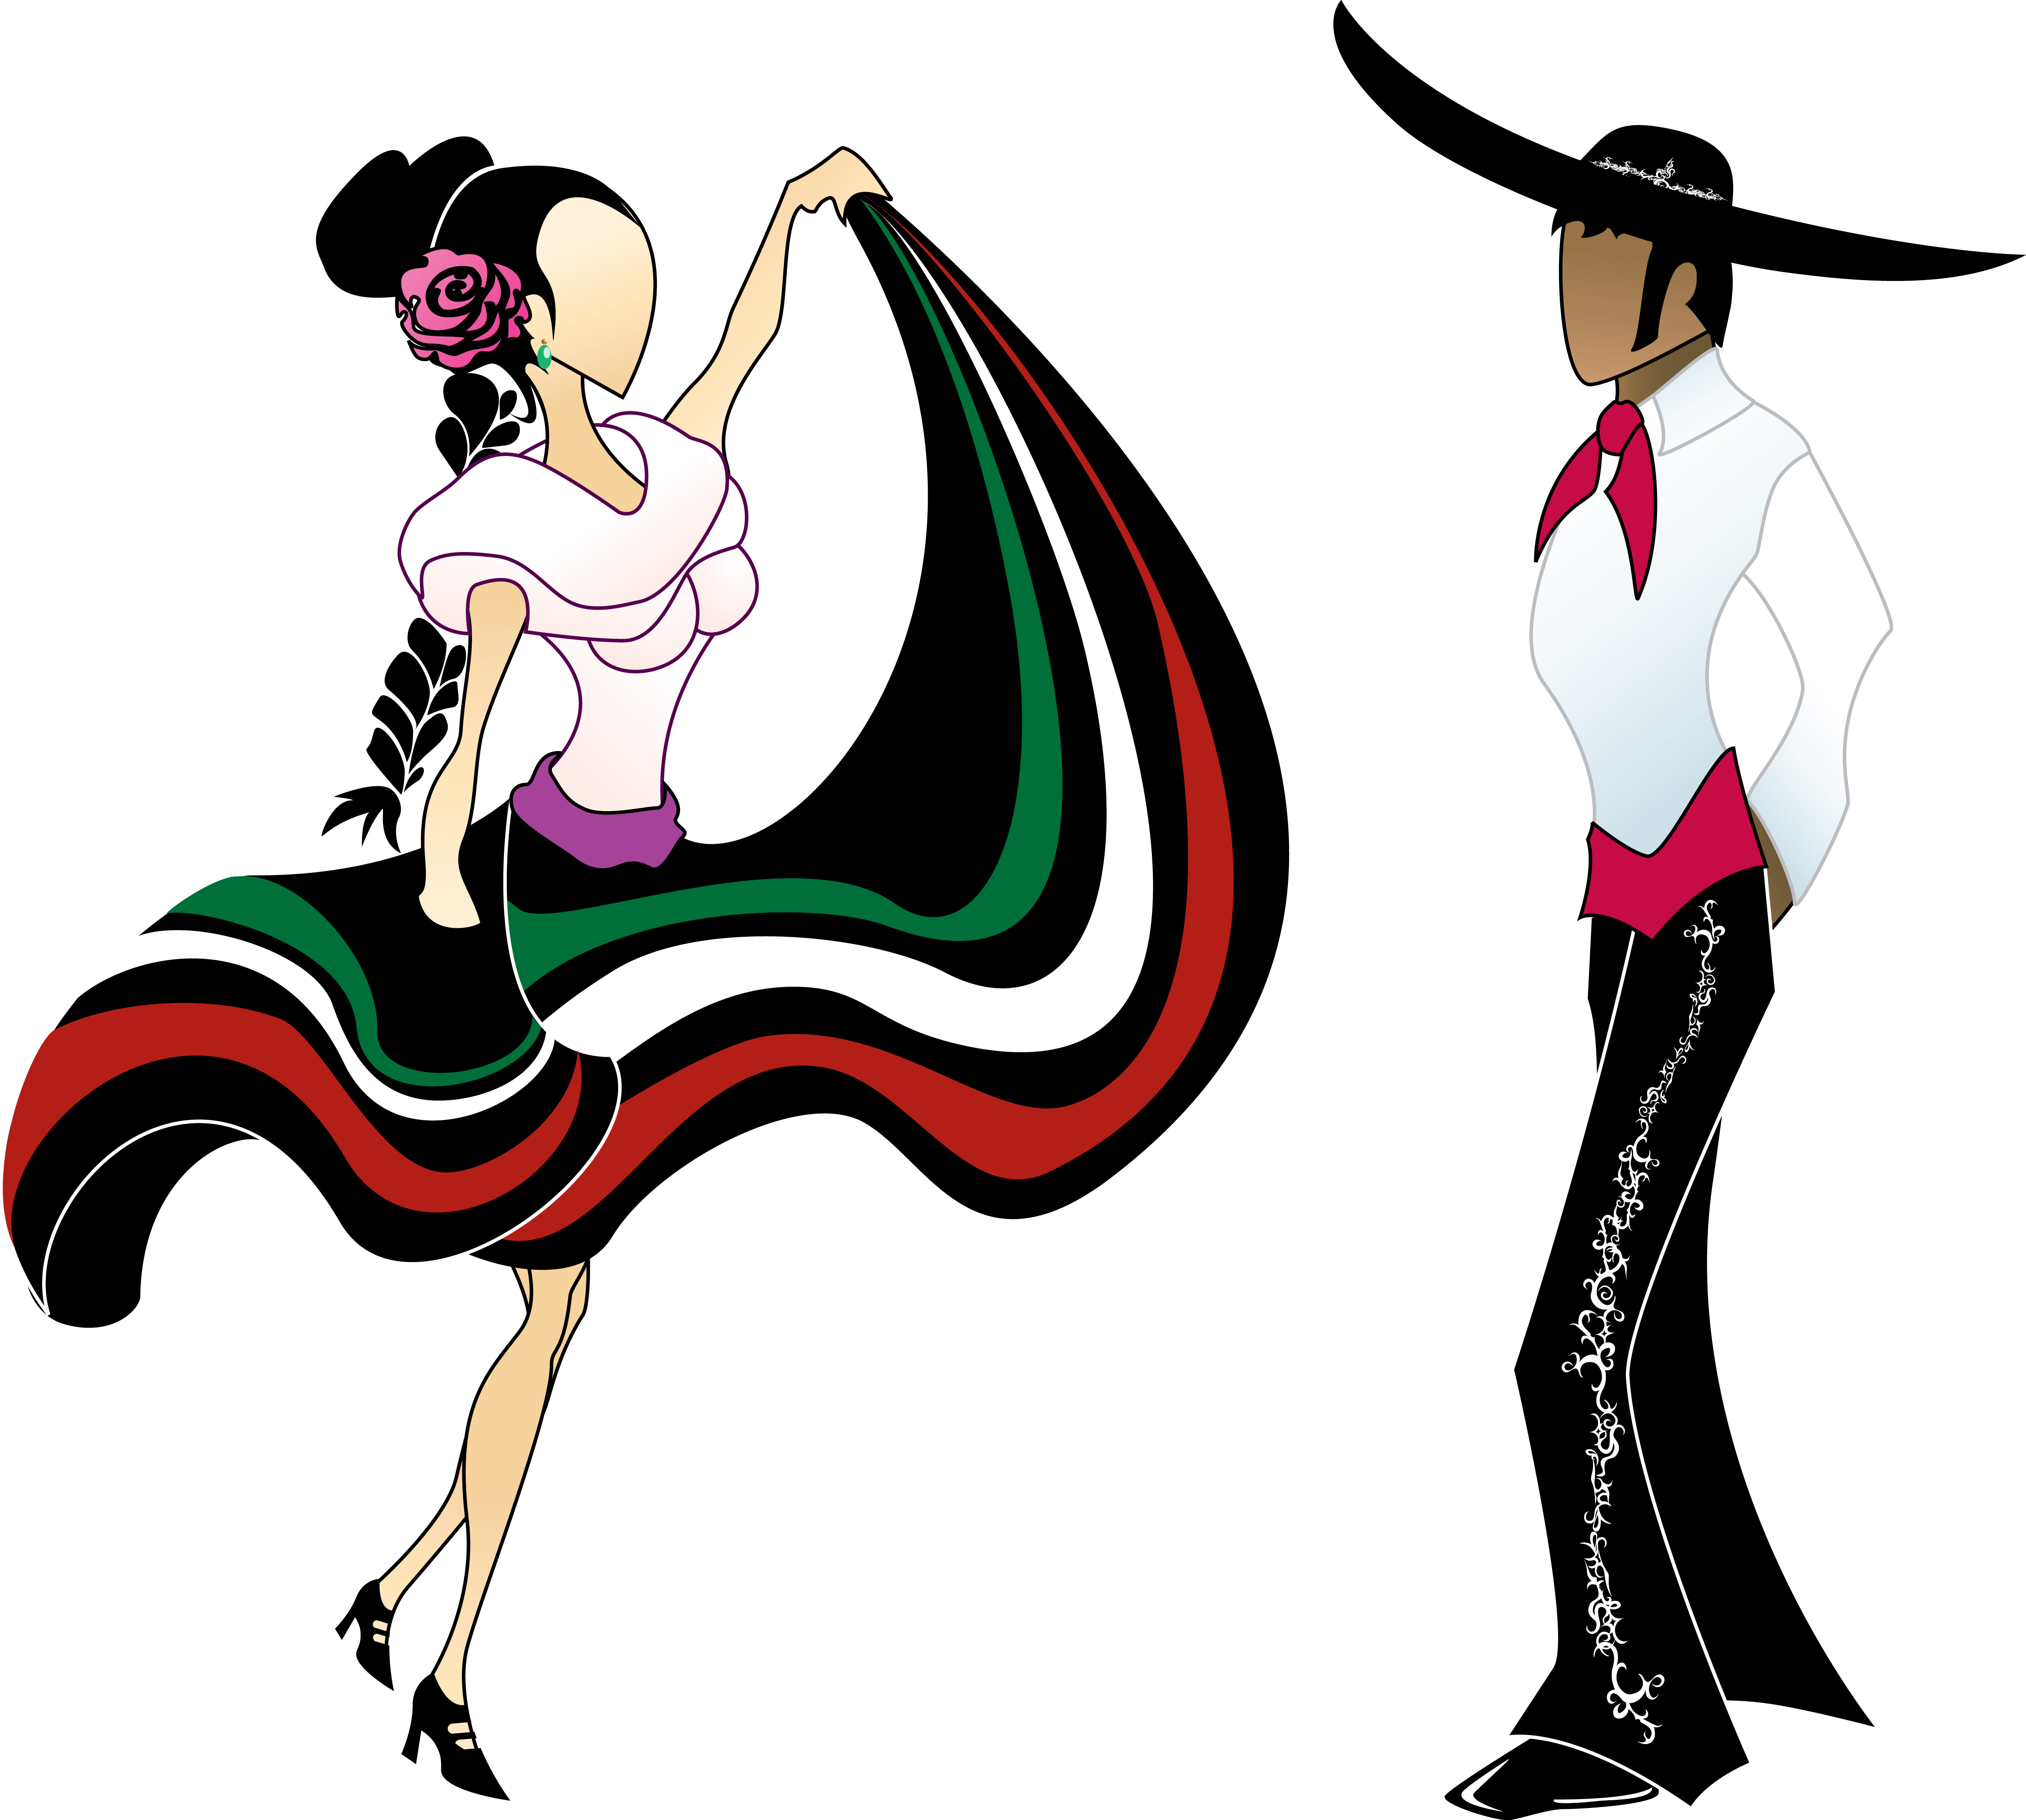 Clip Arts Related To : transparent dance silhouette. view all Female Dancer Cliparts). 